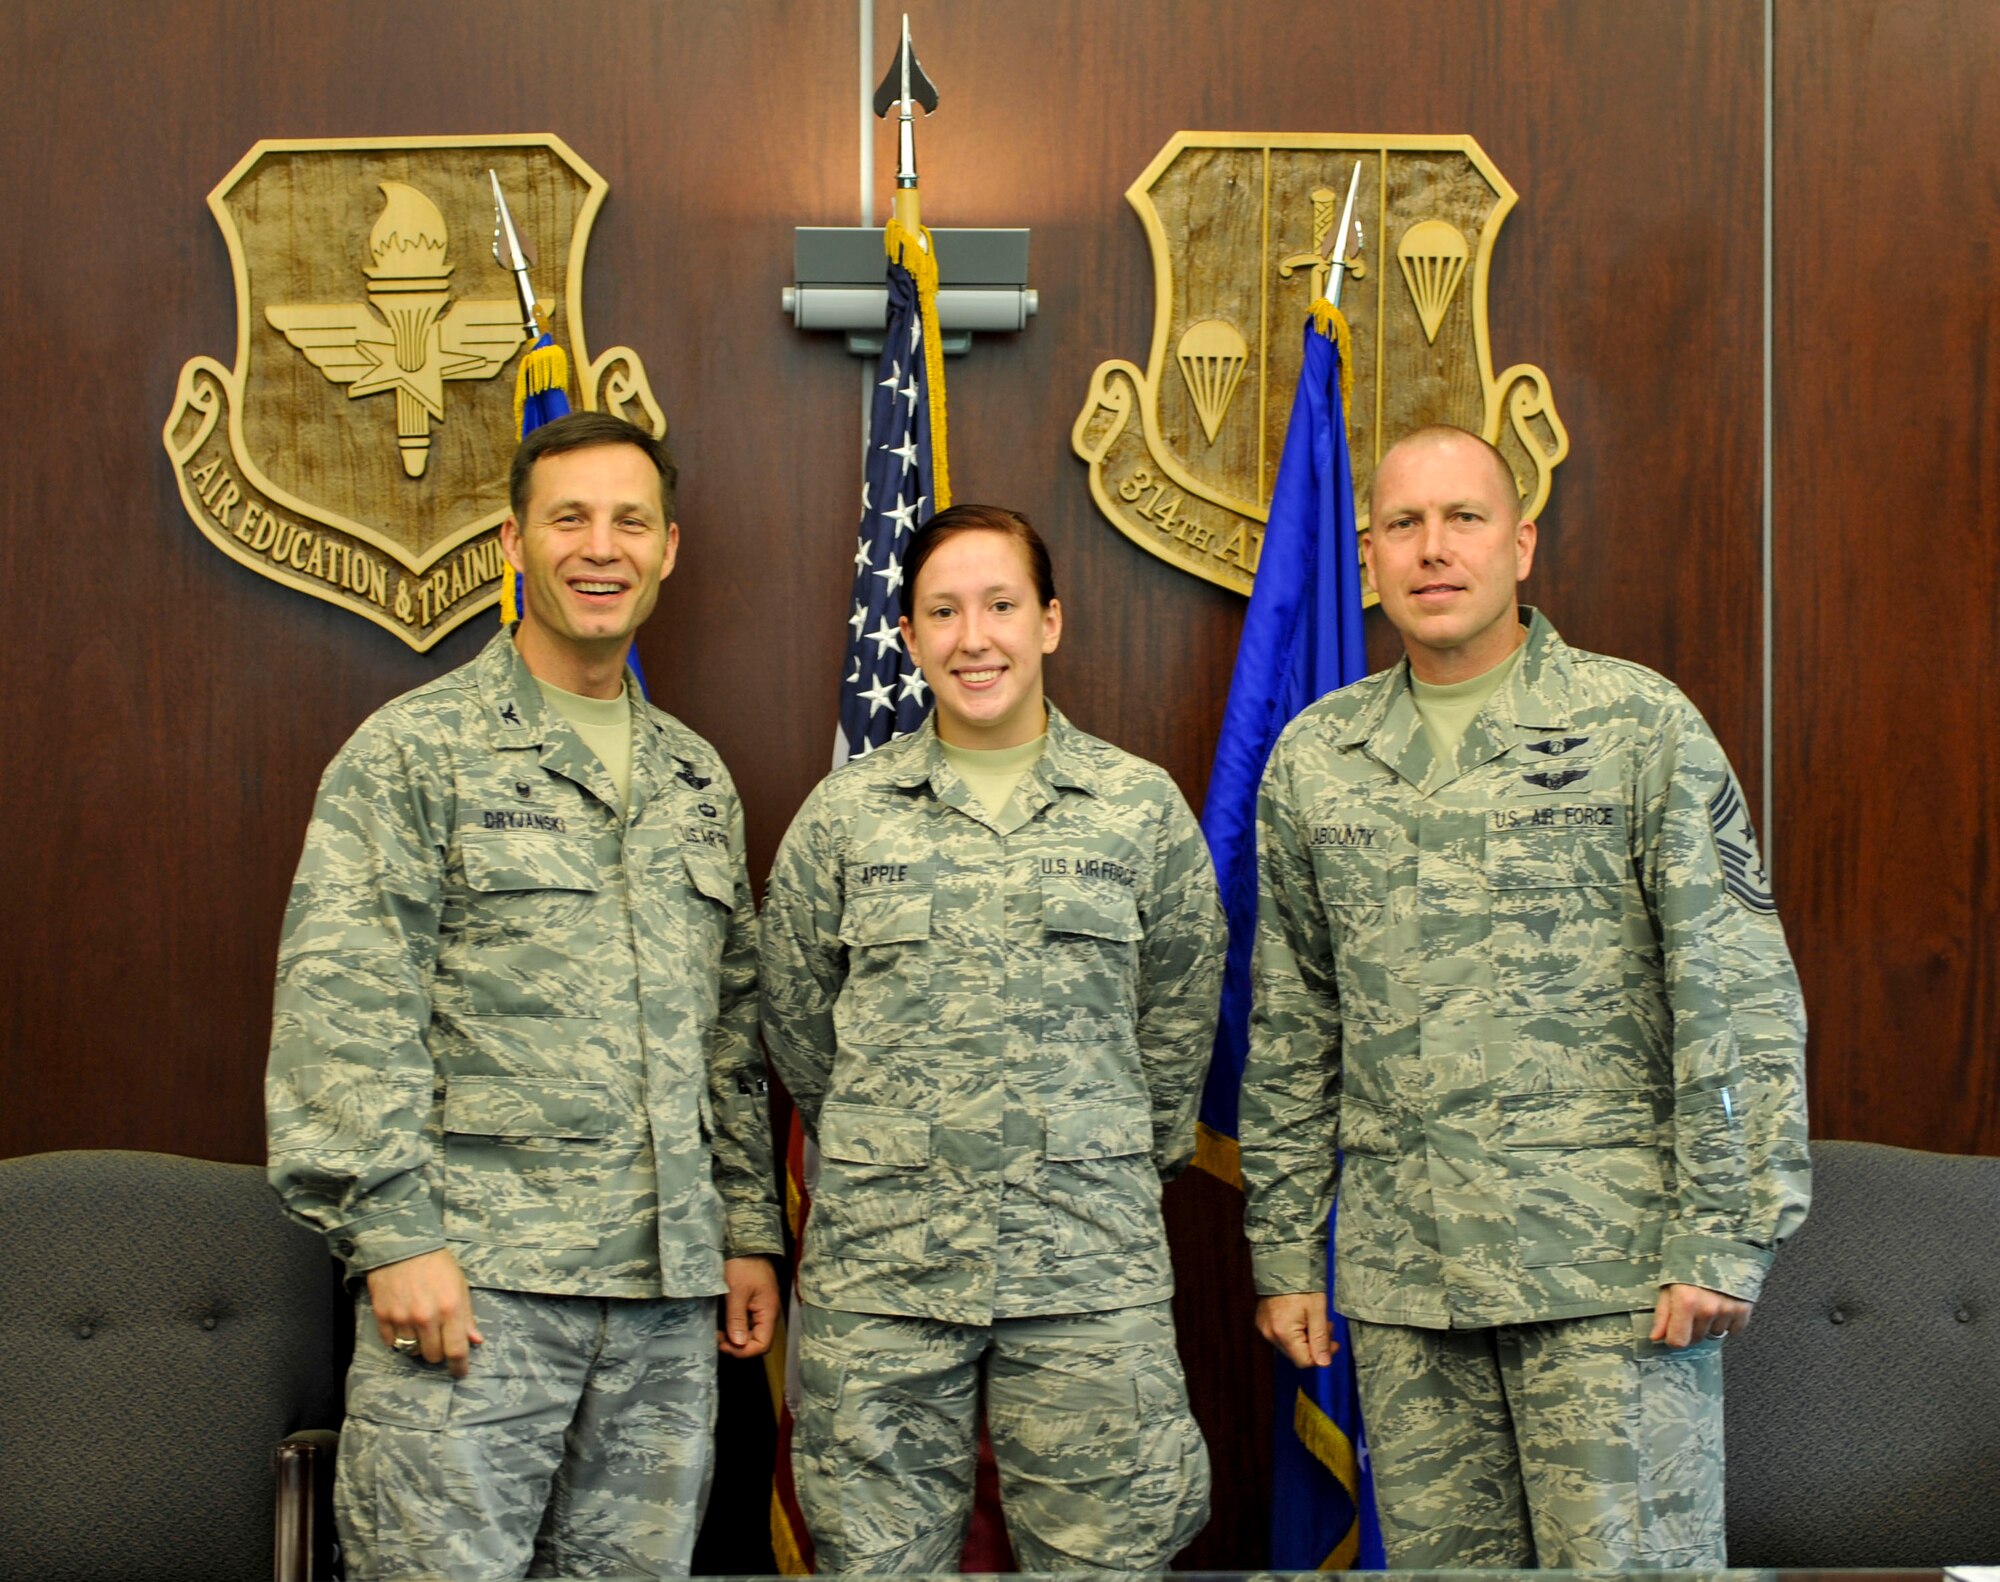 Col. James Dryjanski, 314th Airlift Wing commander, along with Chief Master Sgt. Brian Labounty, 314th Airlift Wing command chief, congratulate Airman 1st Class Justine Apple, a 314th Aircraft Maintenance Squadron apprentice, on her selection as Combat Airlifter of the Week July 8, 2015, at Little Rock Air Force Base, Ark. Apple is a vital team member who monitors and coordinates maintenance actions on 18 C-130H aircraft supporting initial and advanced aircrew training.  (U.S. Air Force photo by Senior Airman Stephanie Serrano)